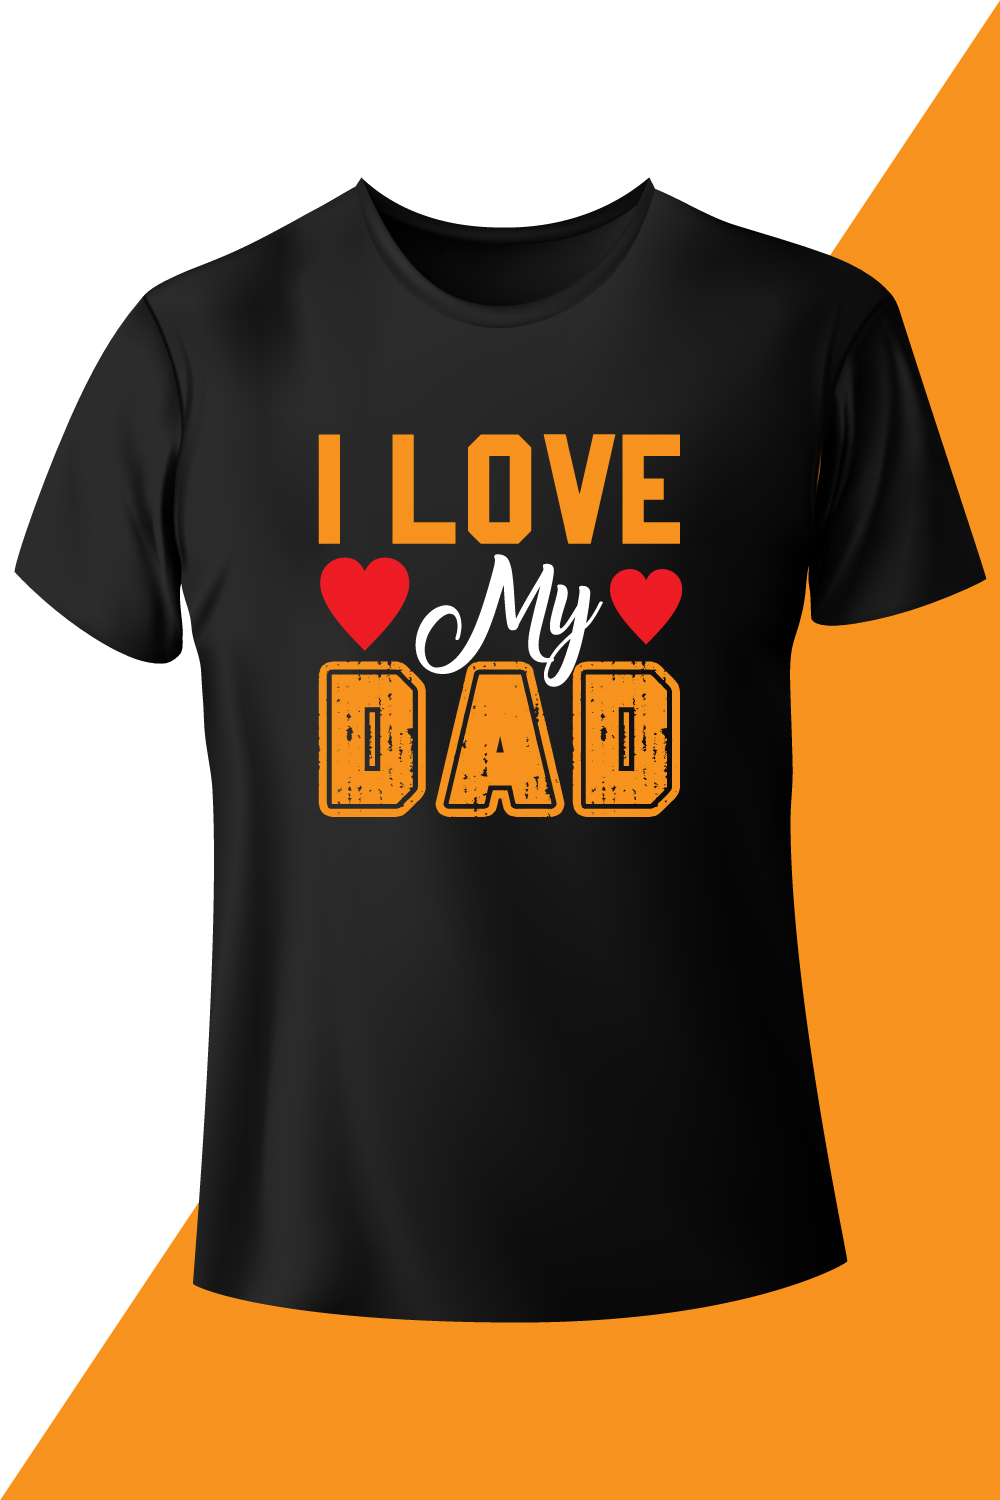 Image of a black t-shirt with amazingly inscription I Love My Dad.